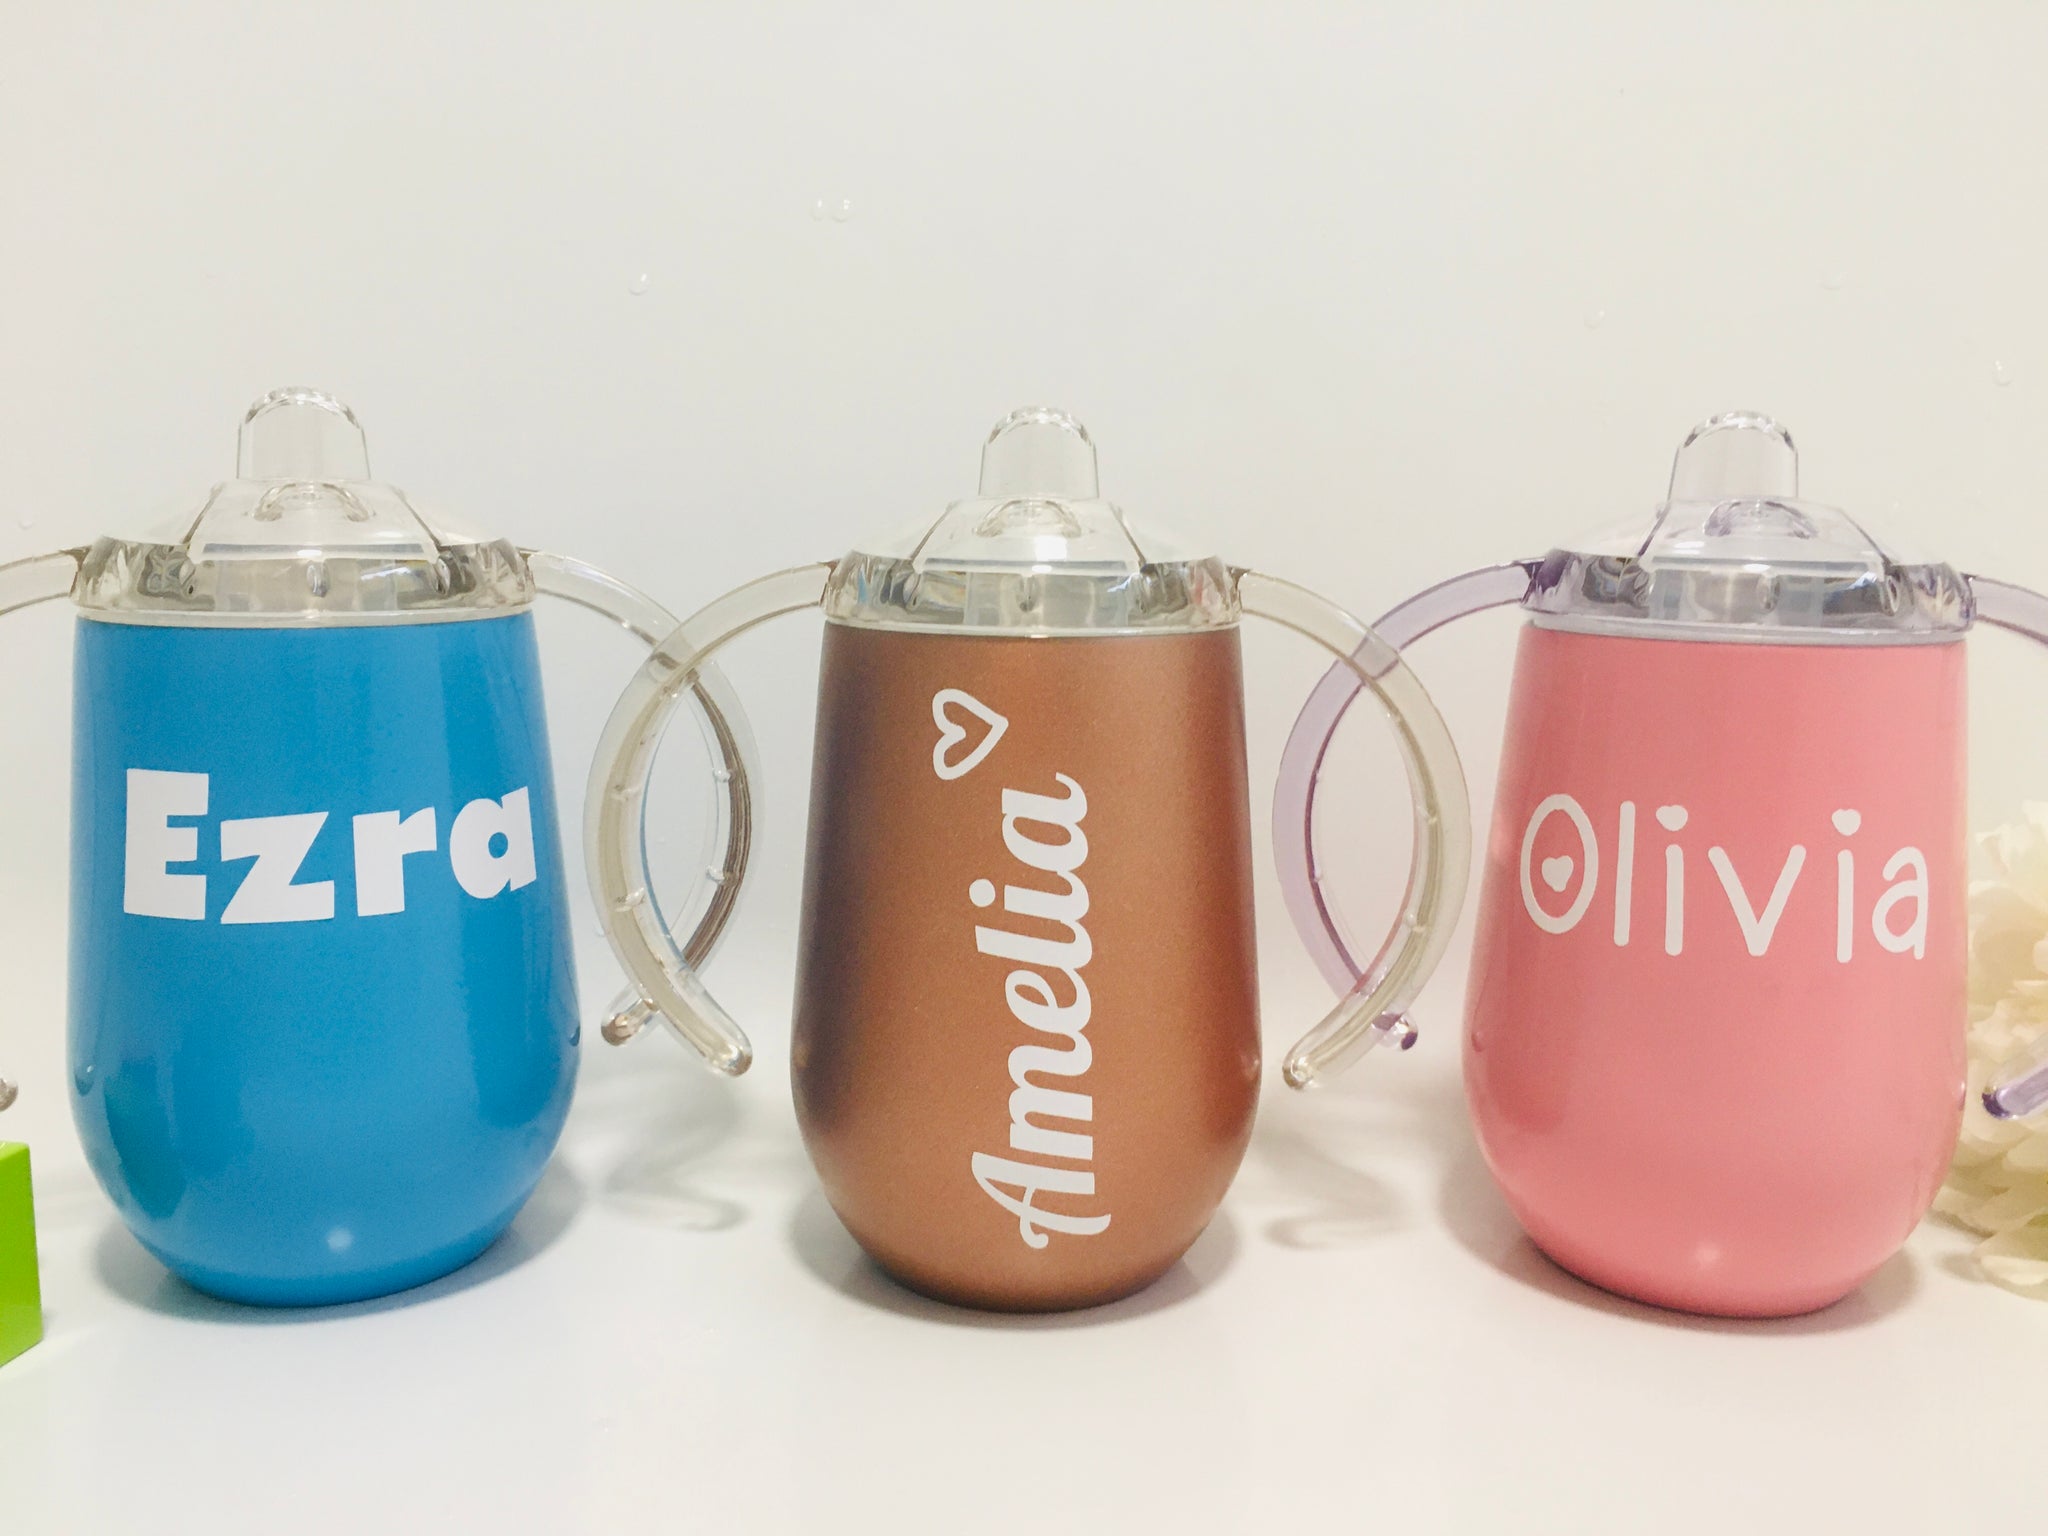 BabyBoss: Personalised Stainless Steel Sippy Cup – Manalosistersboutique